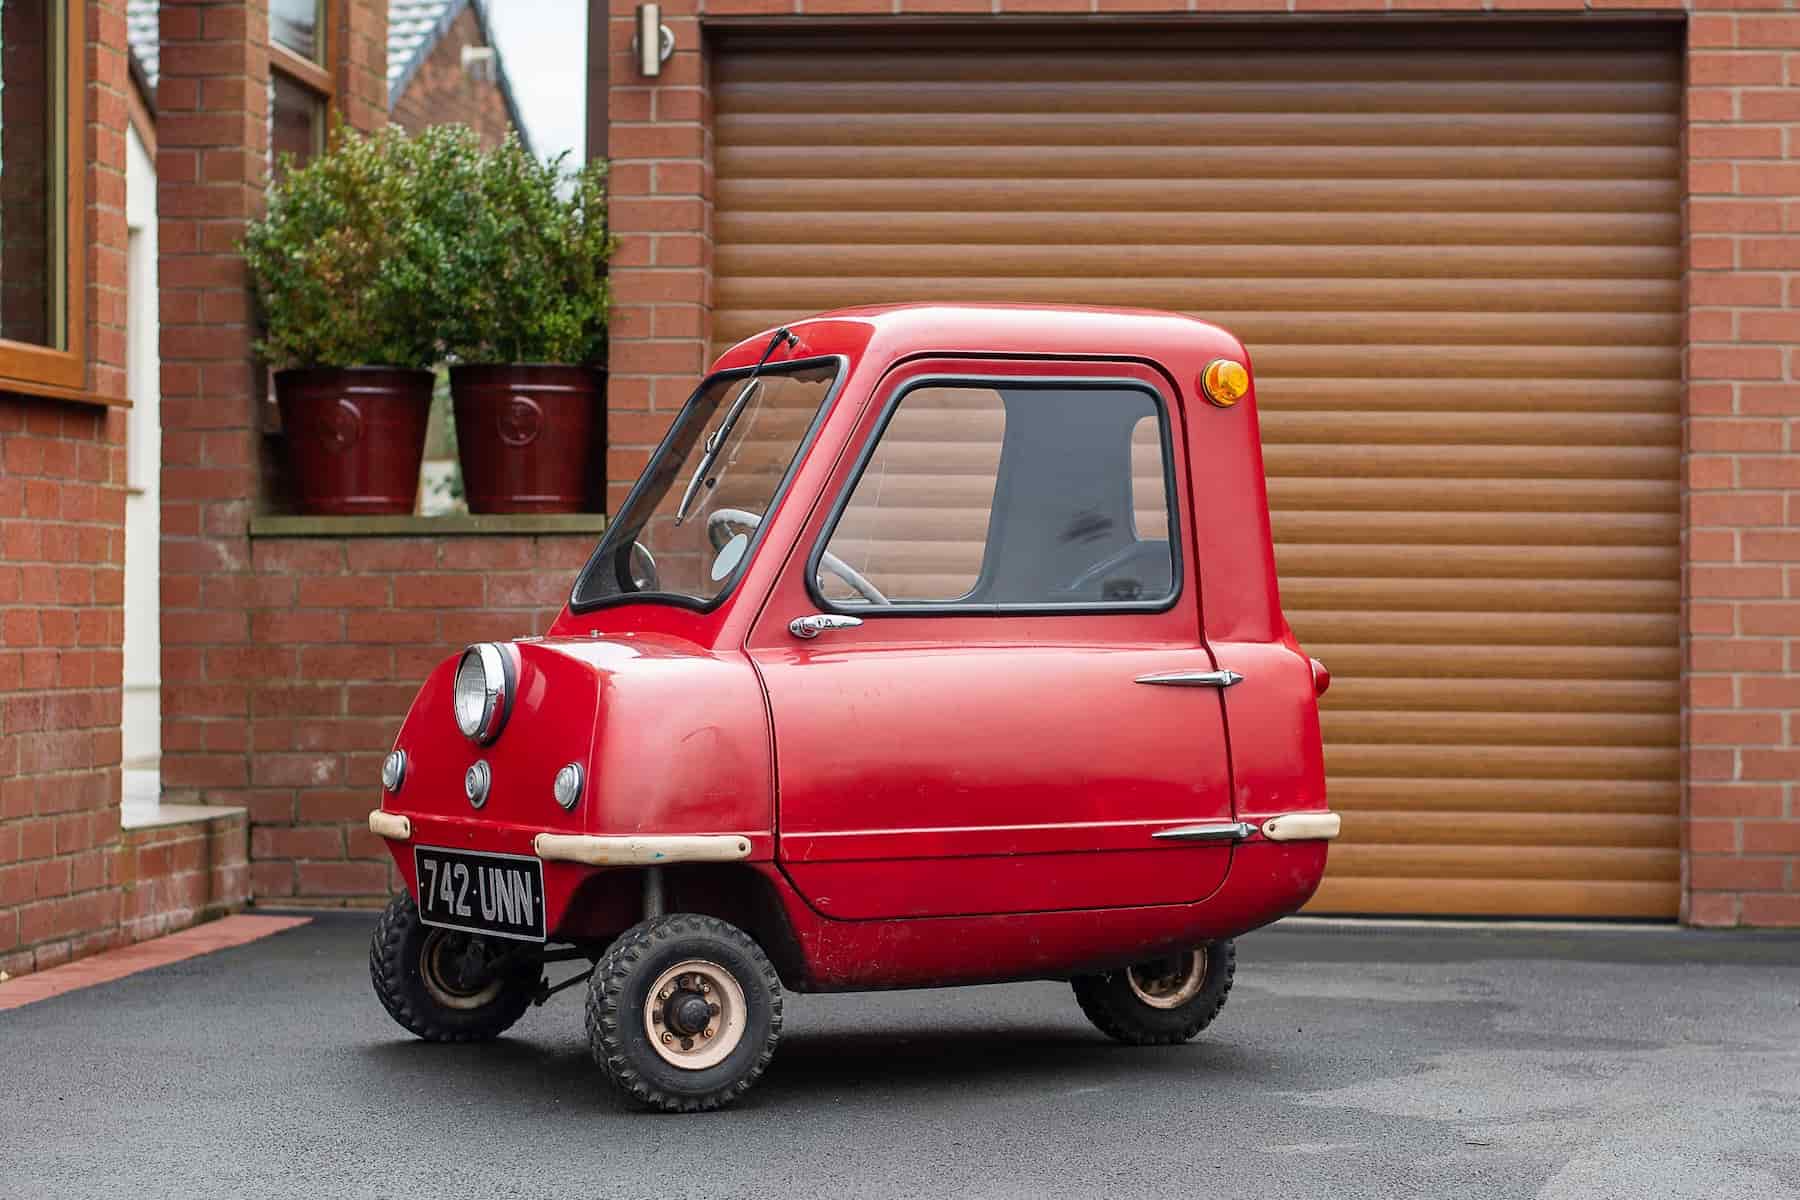 rare 1963 peel p50 microcar sells for a whopping 145000 at auction 1